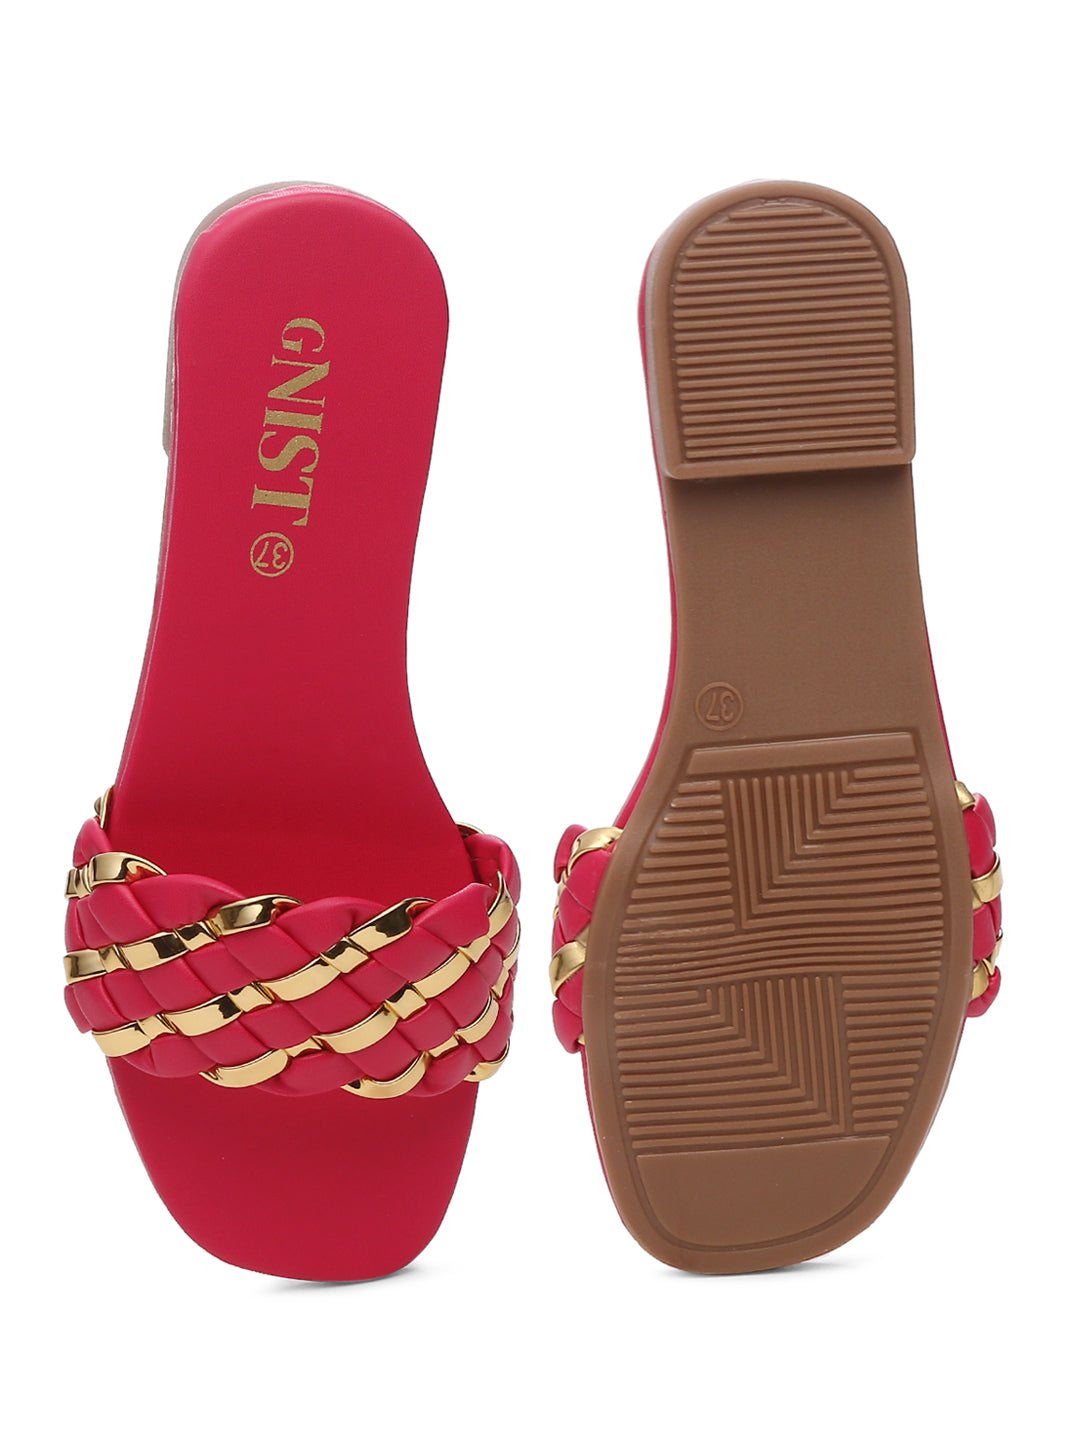 GNIST Hot Pink Gold Braided Flat